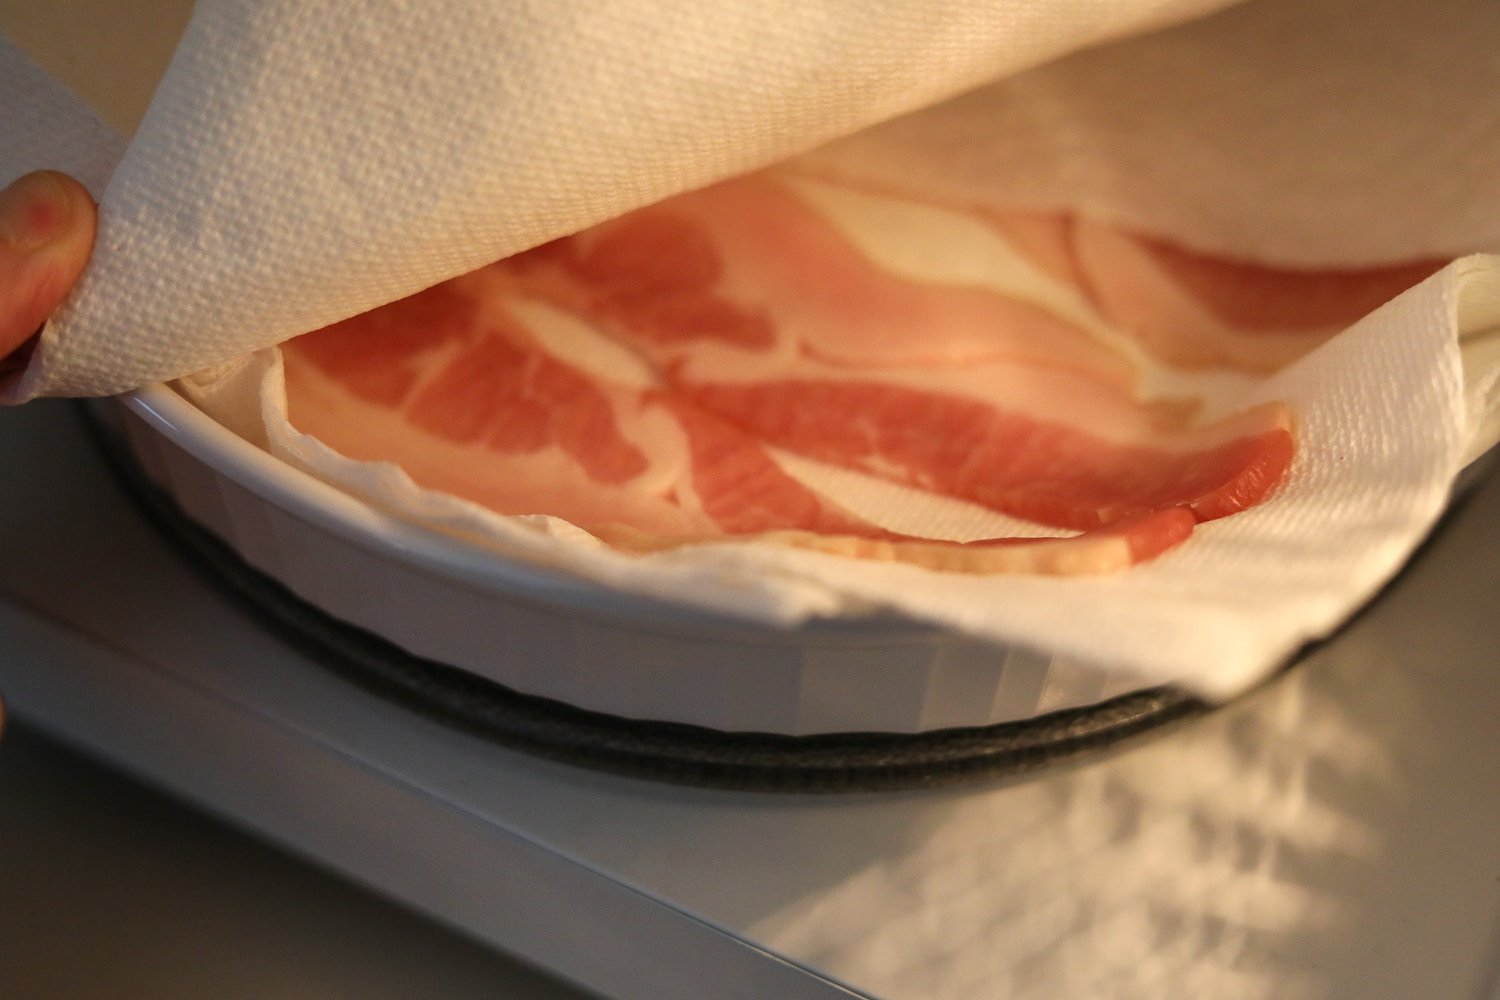 bacon on a glass plate in the microwave